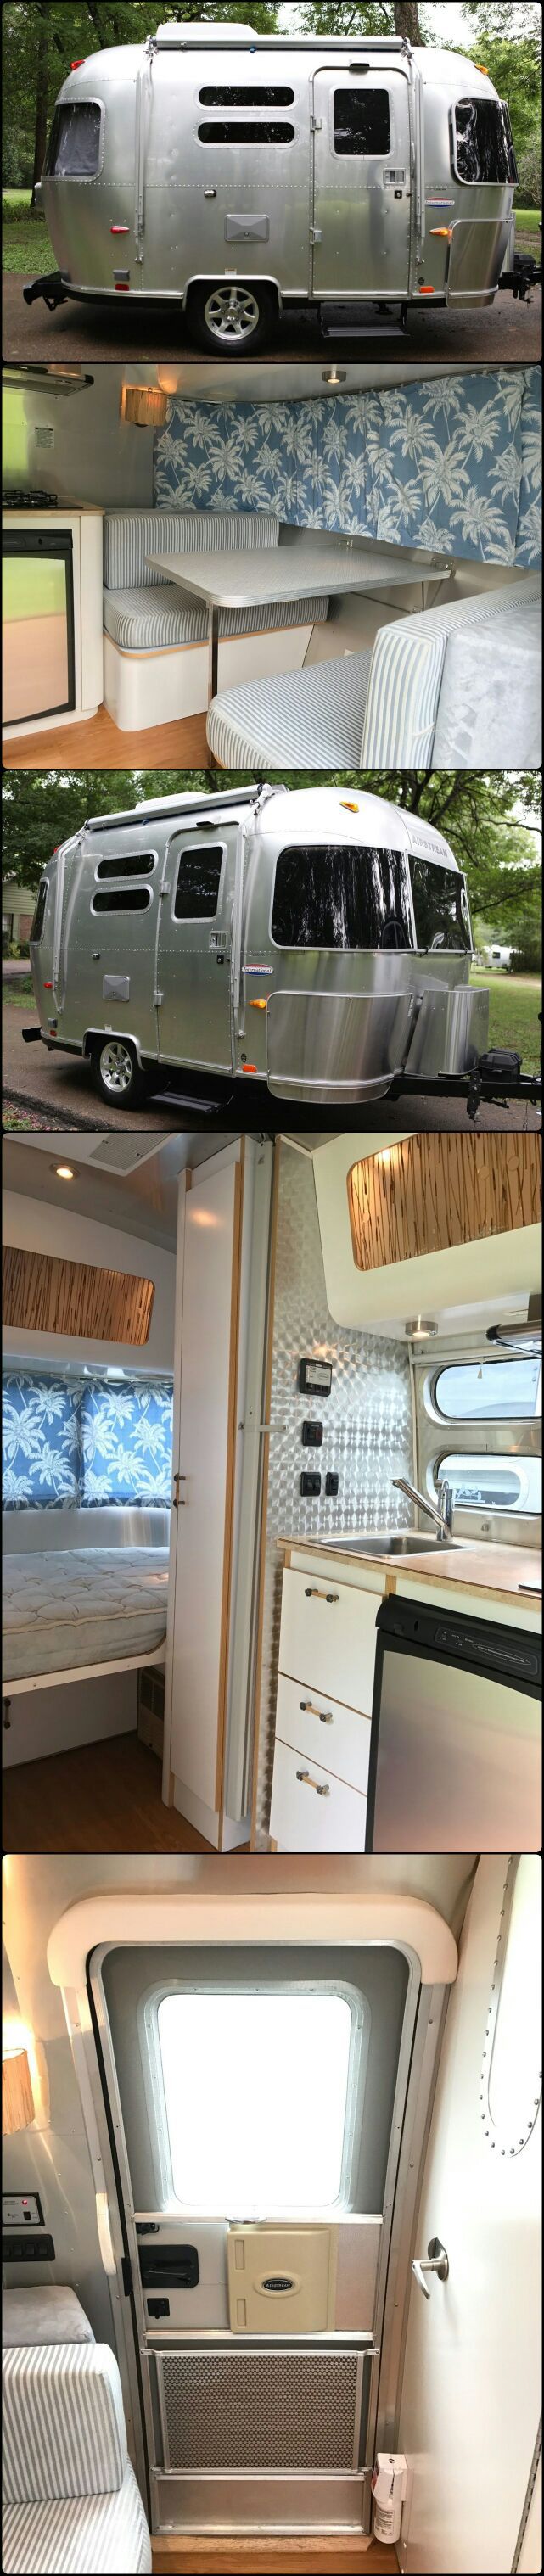 excellent condition 2005 Airstream 16ft. Bambi Ocean Breeze Trailer